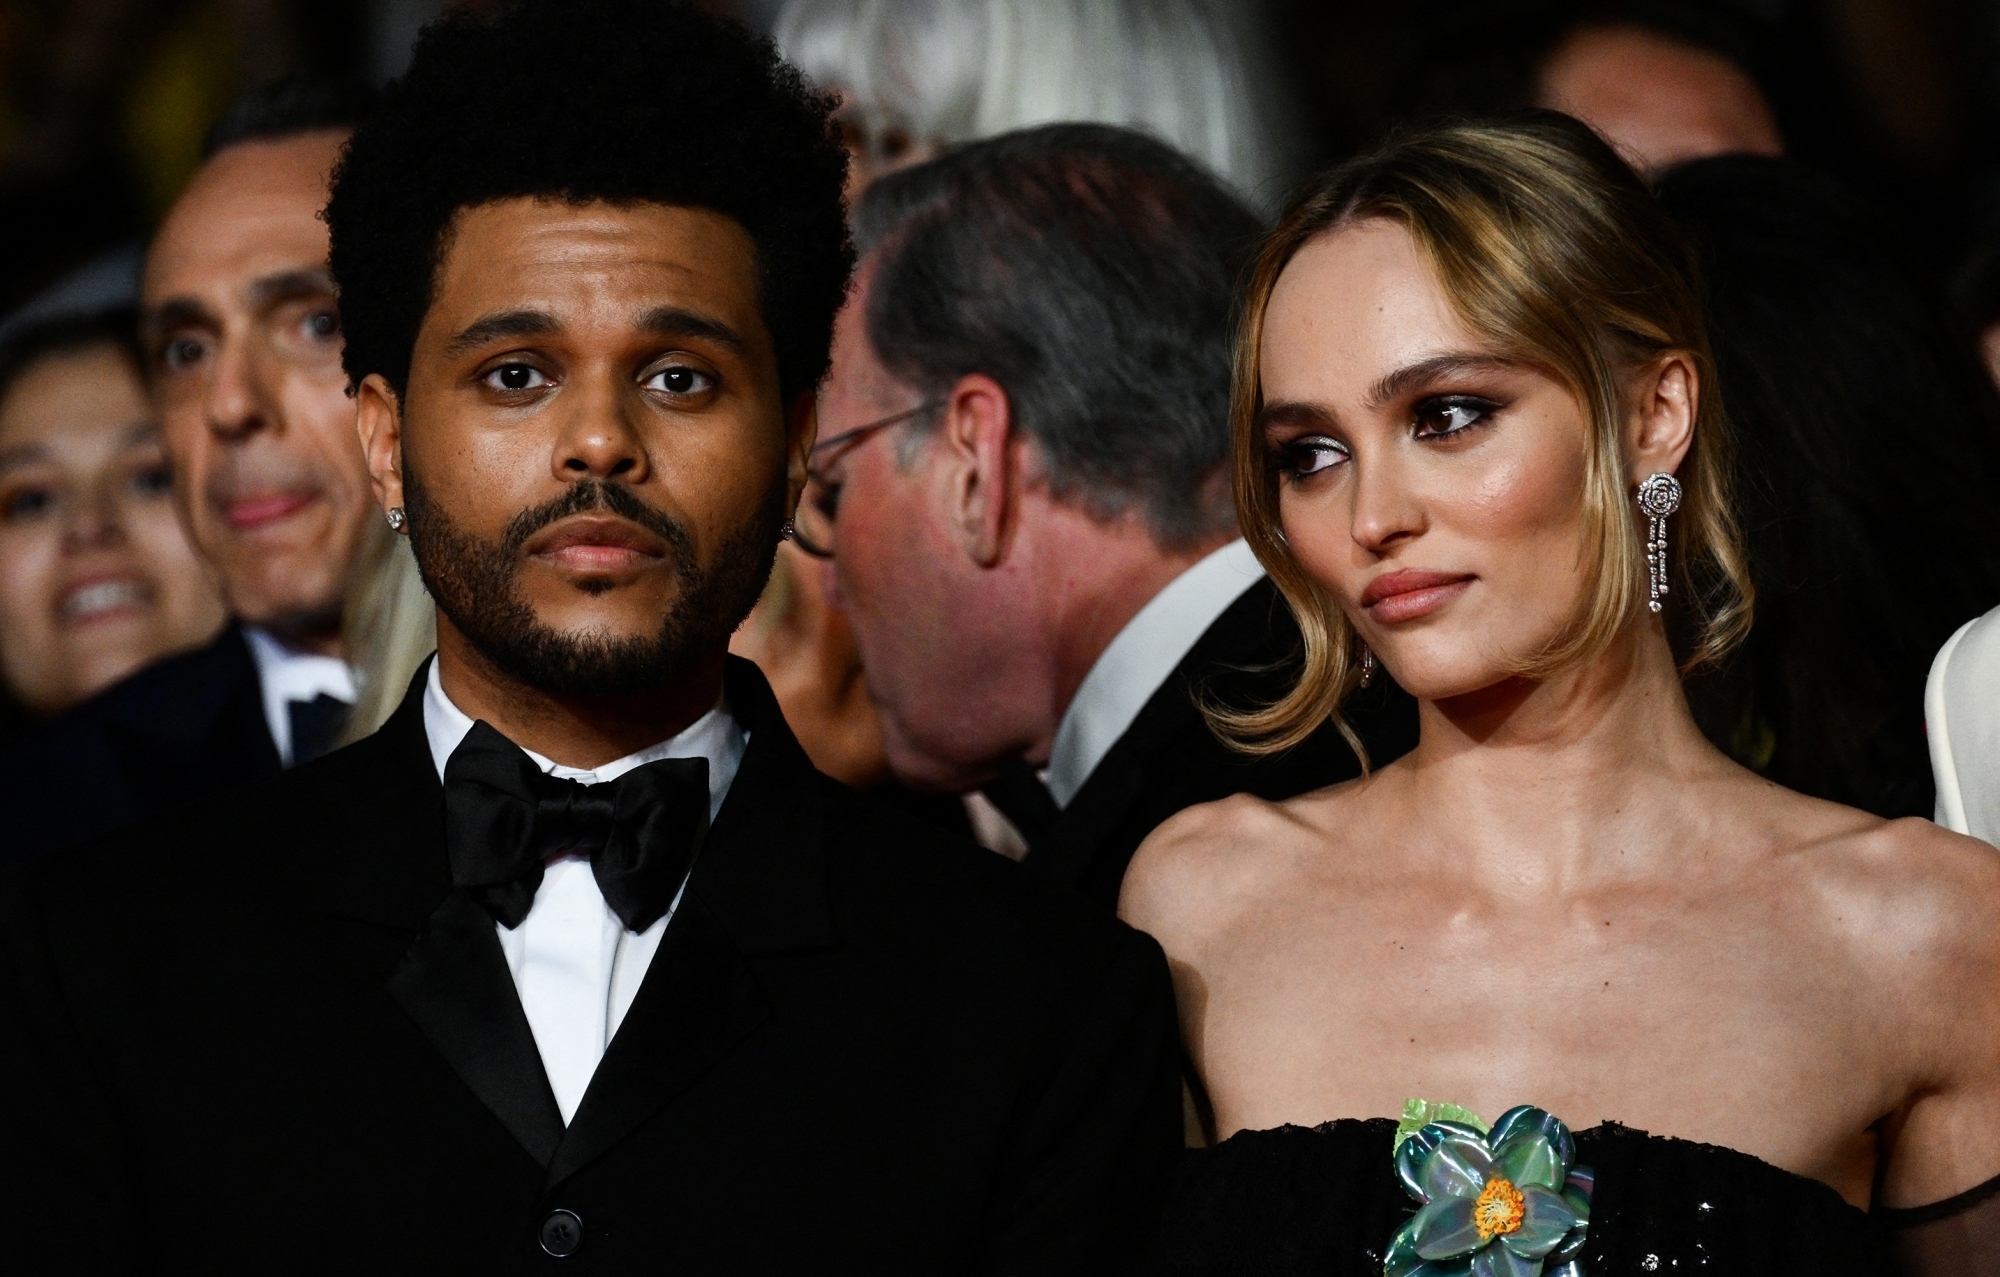 The Weeknd, Lily-Rose Depp scandalise Cannes with 'The Idol'